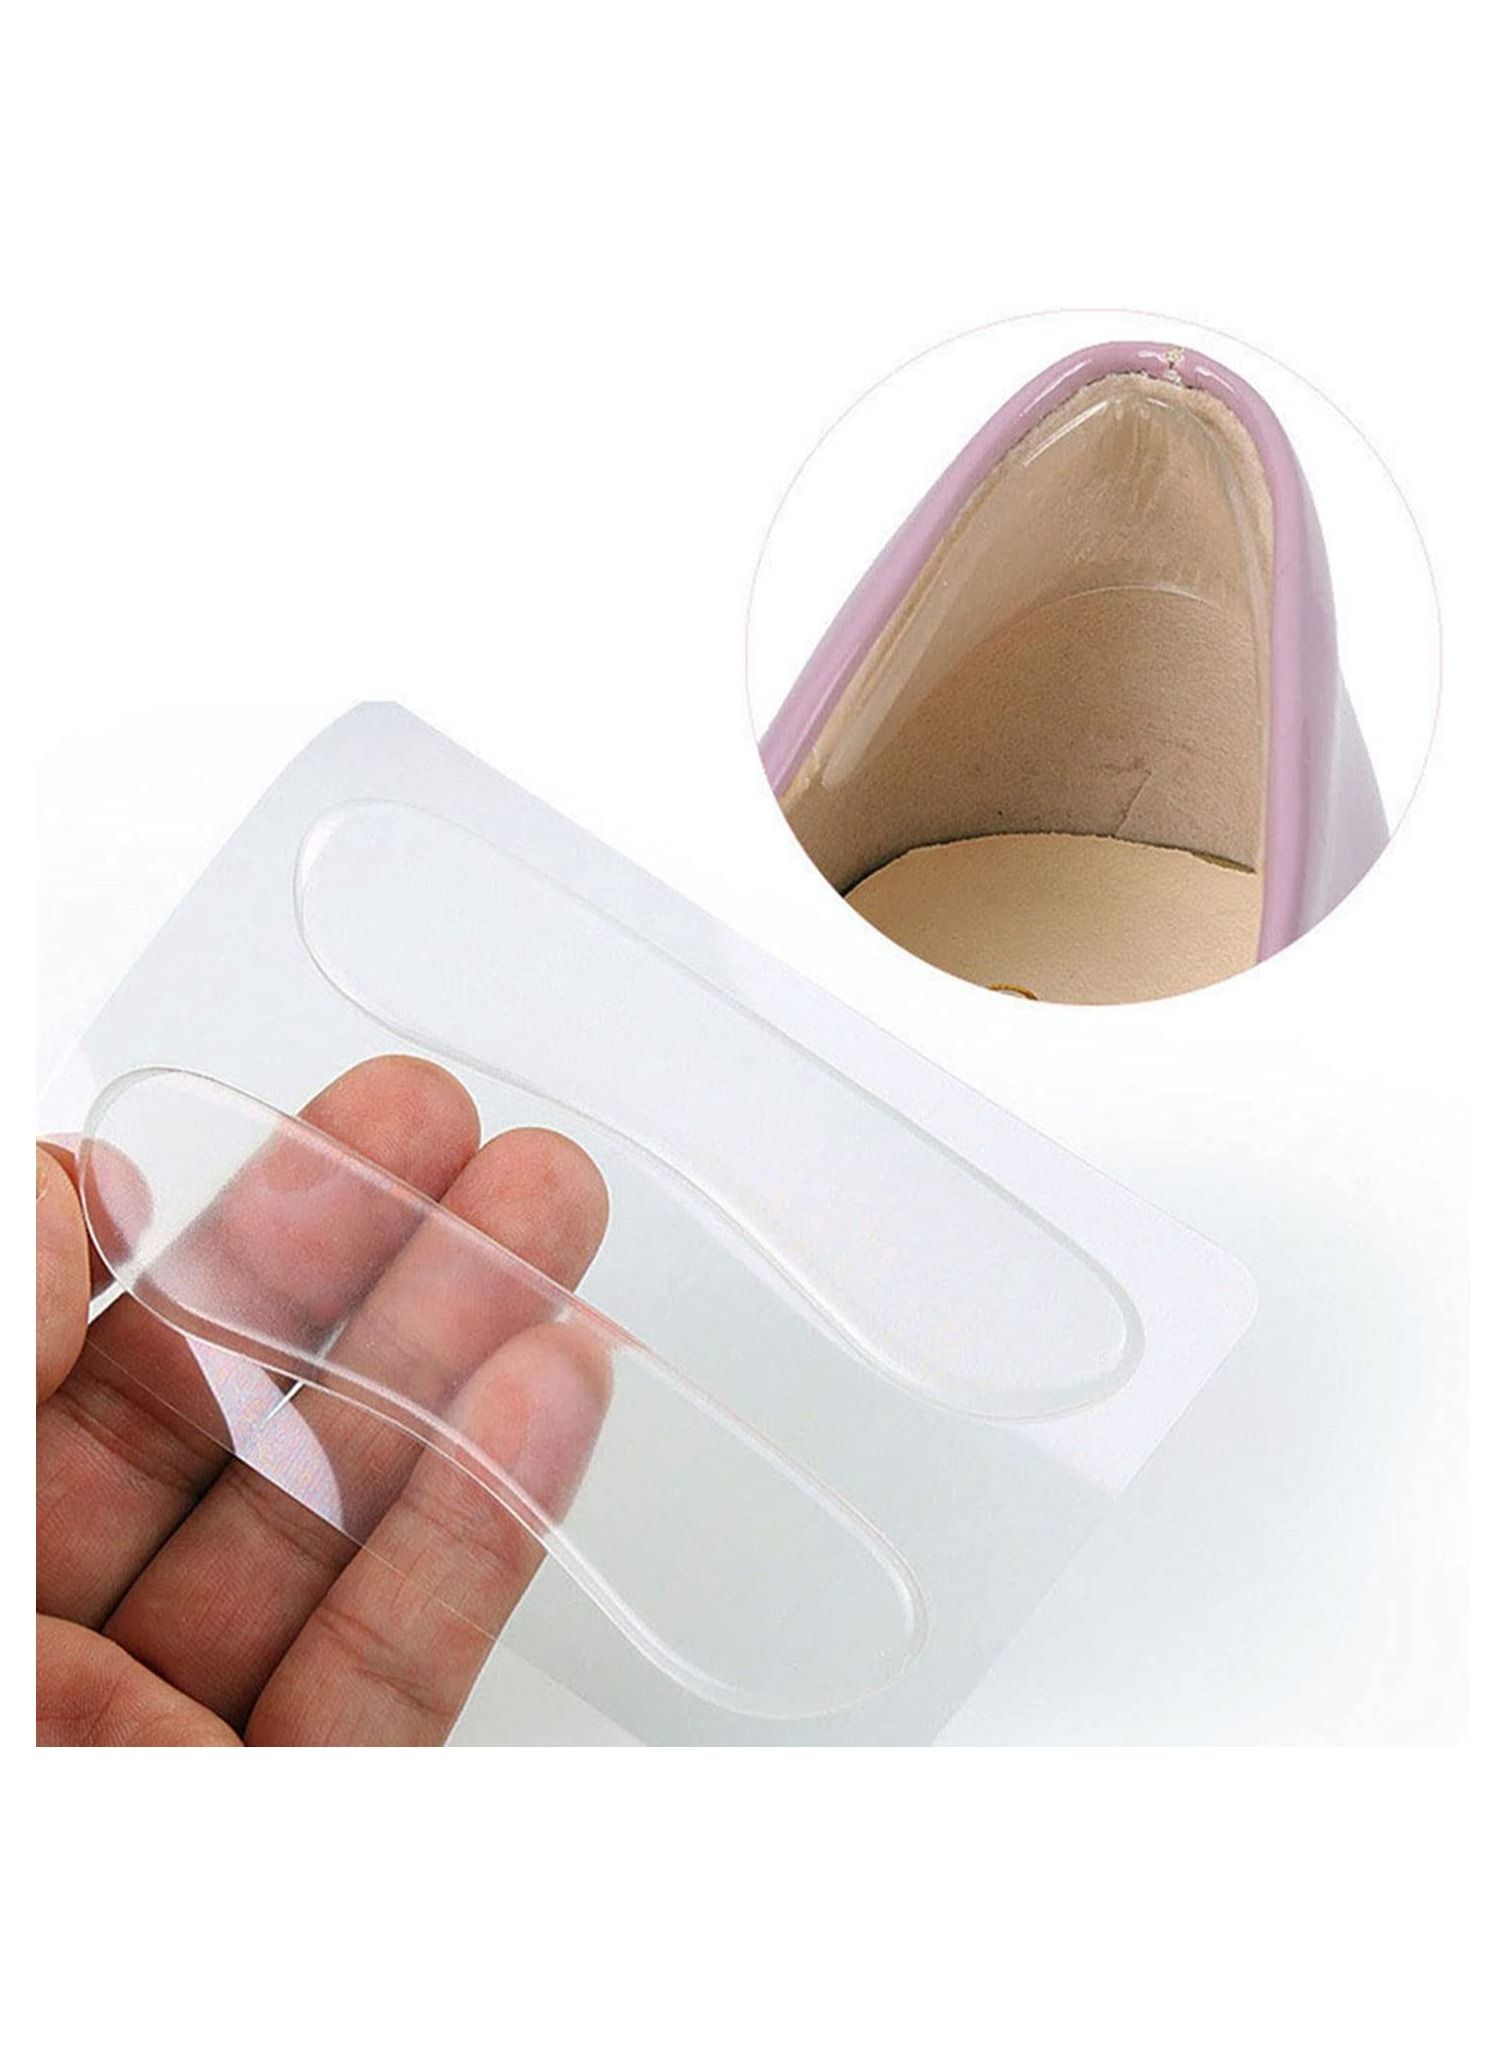 Anadimall Reusable Heel Cushion Inserts for Shoes Heel Pads Self Adhesive  Back Grips Liners Blister and